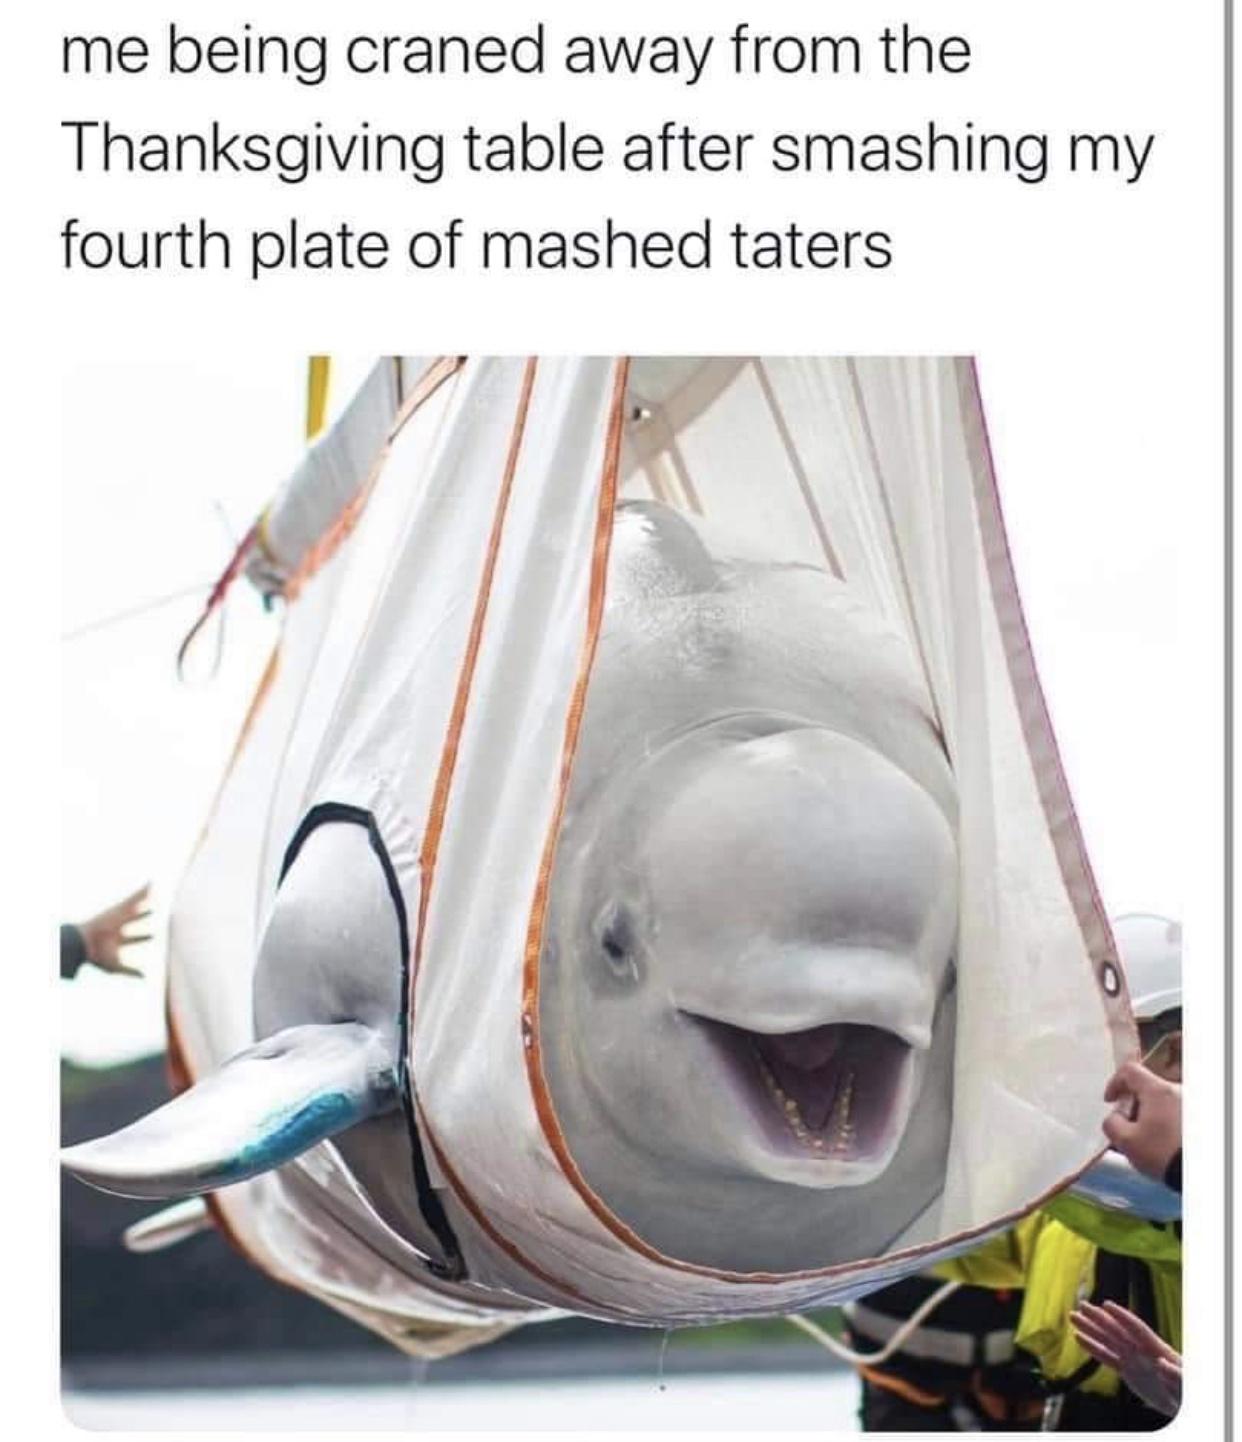 beluga whale rescue china - me being craned away from the Thanksgiving table after smashing my fourth plate of mashed taters